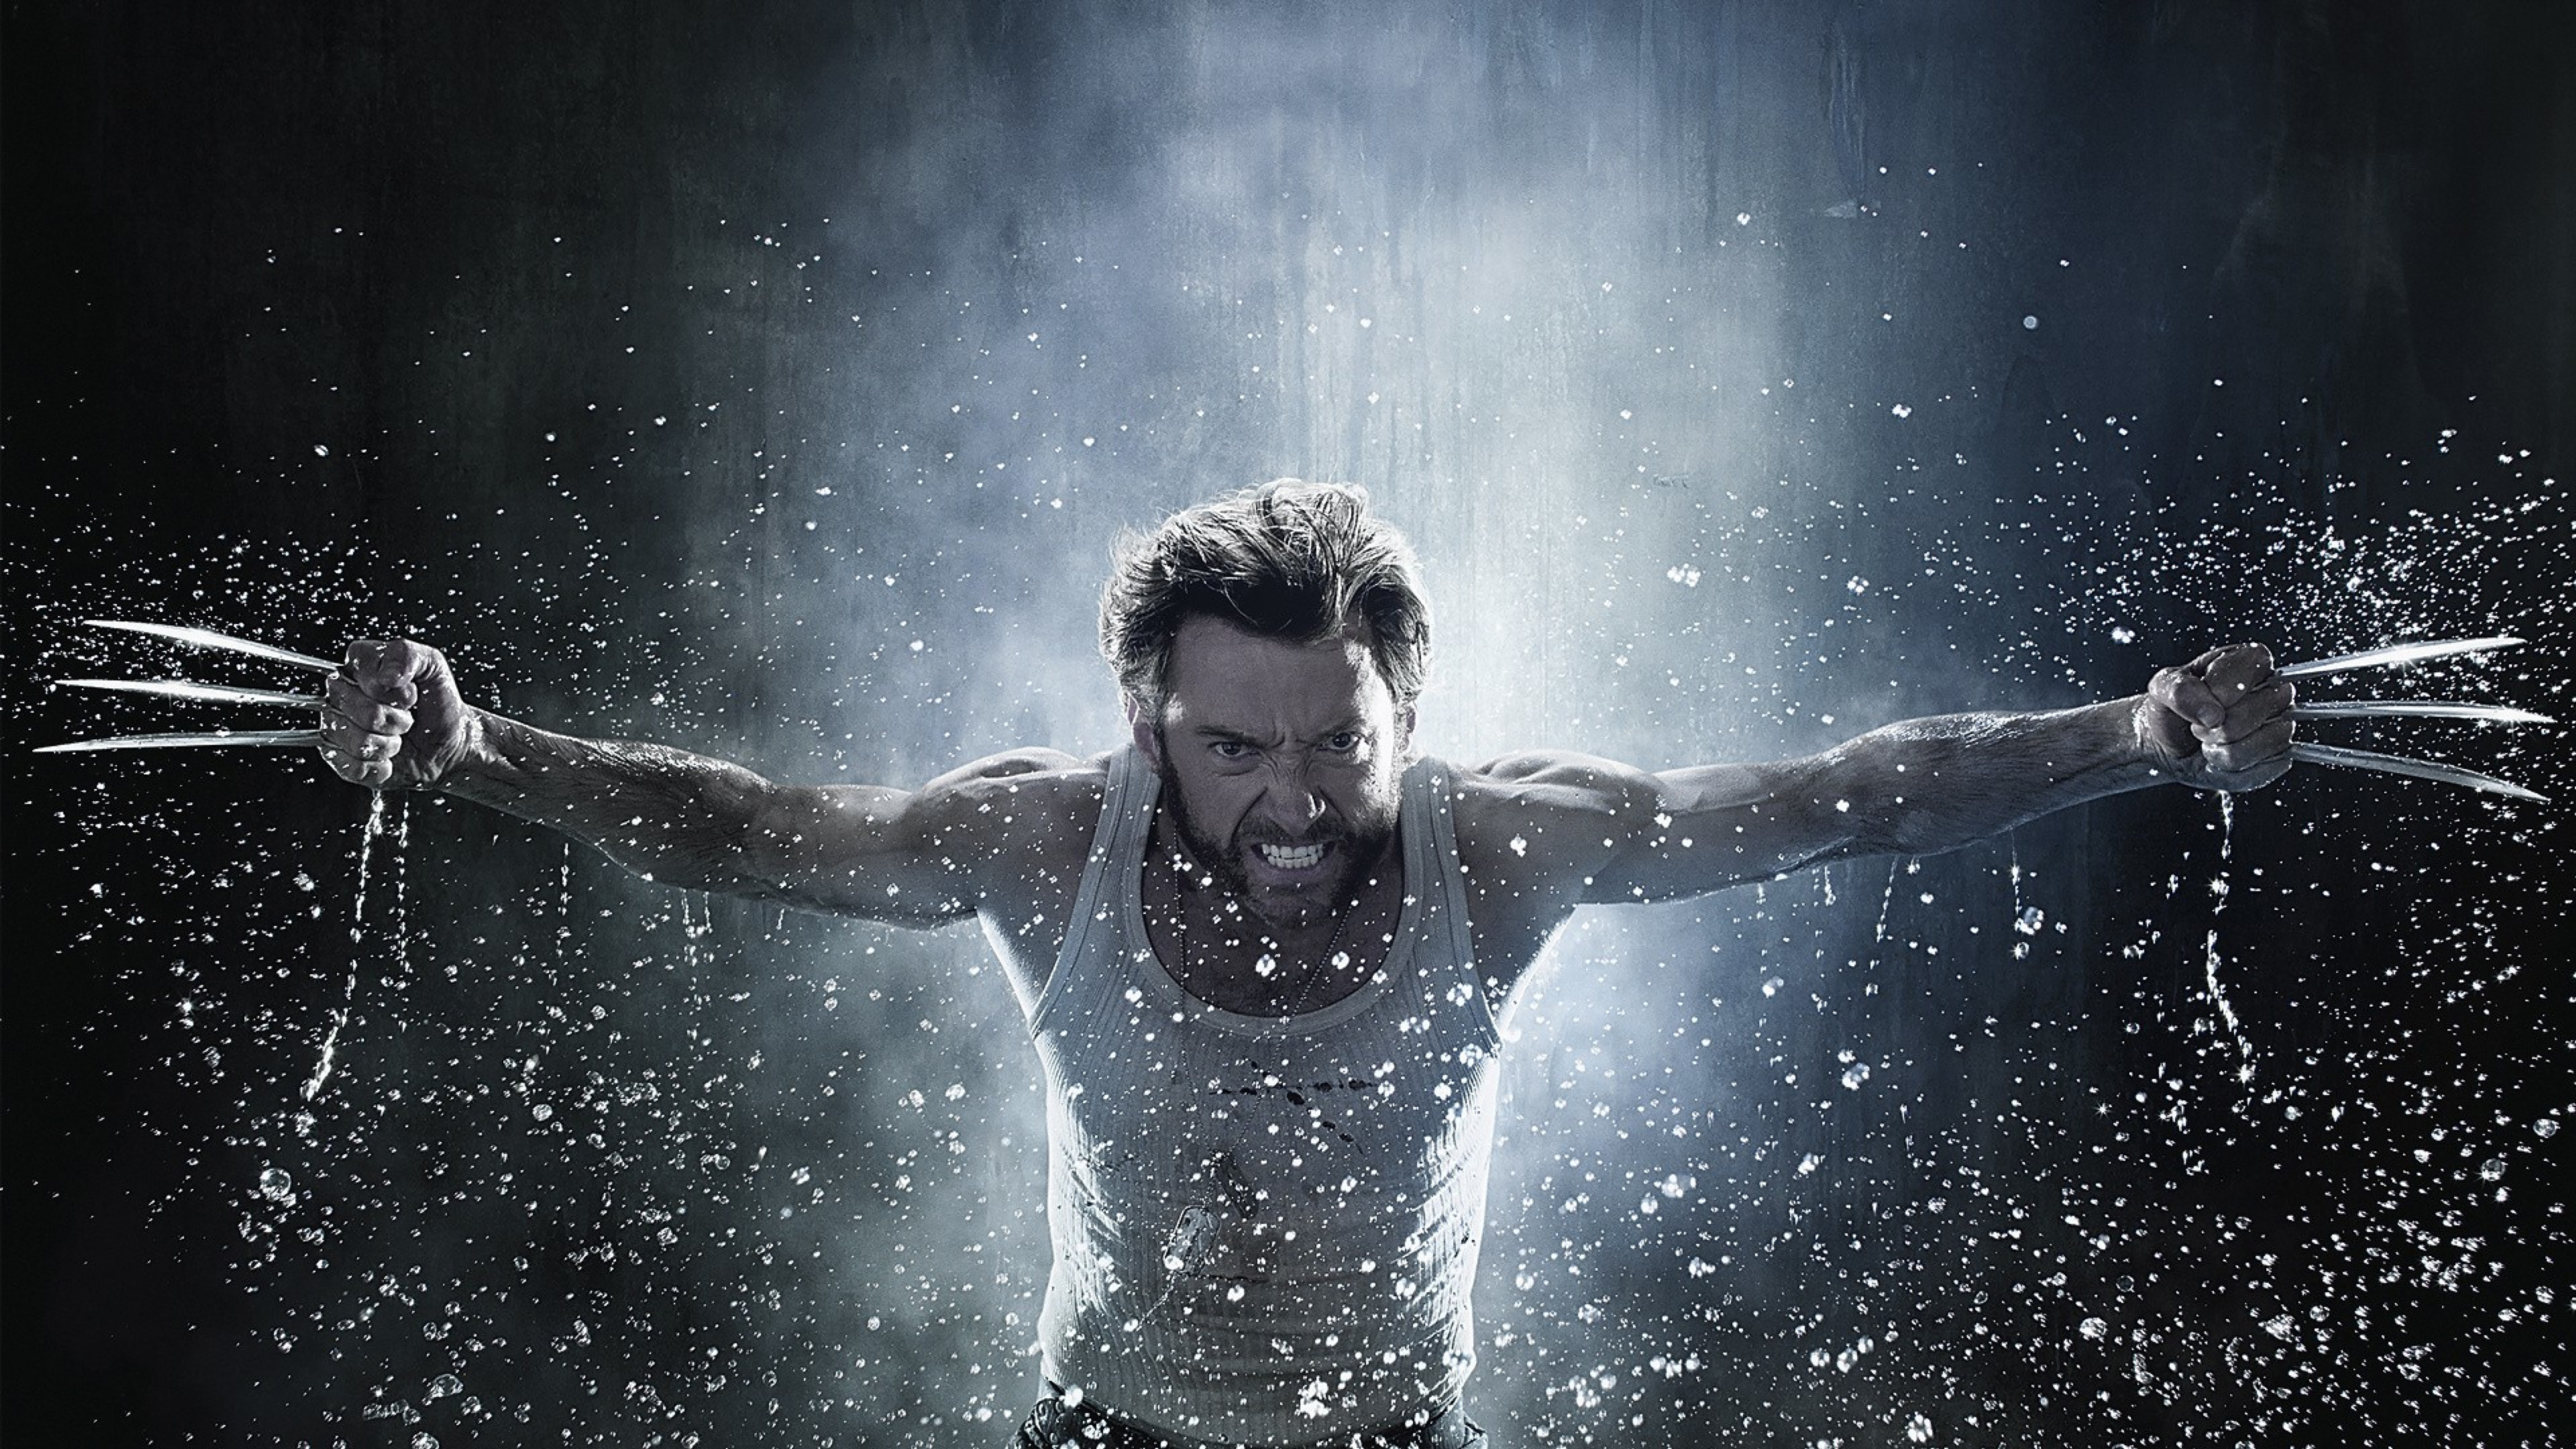 wolverine wallpaper,water,human,photography,performance,flash photography